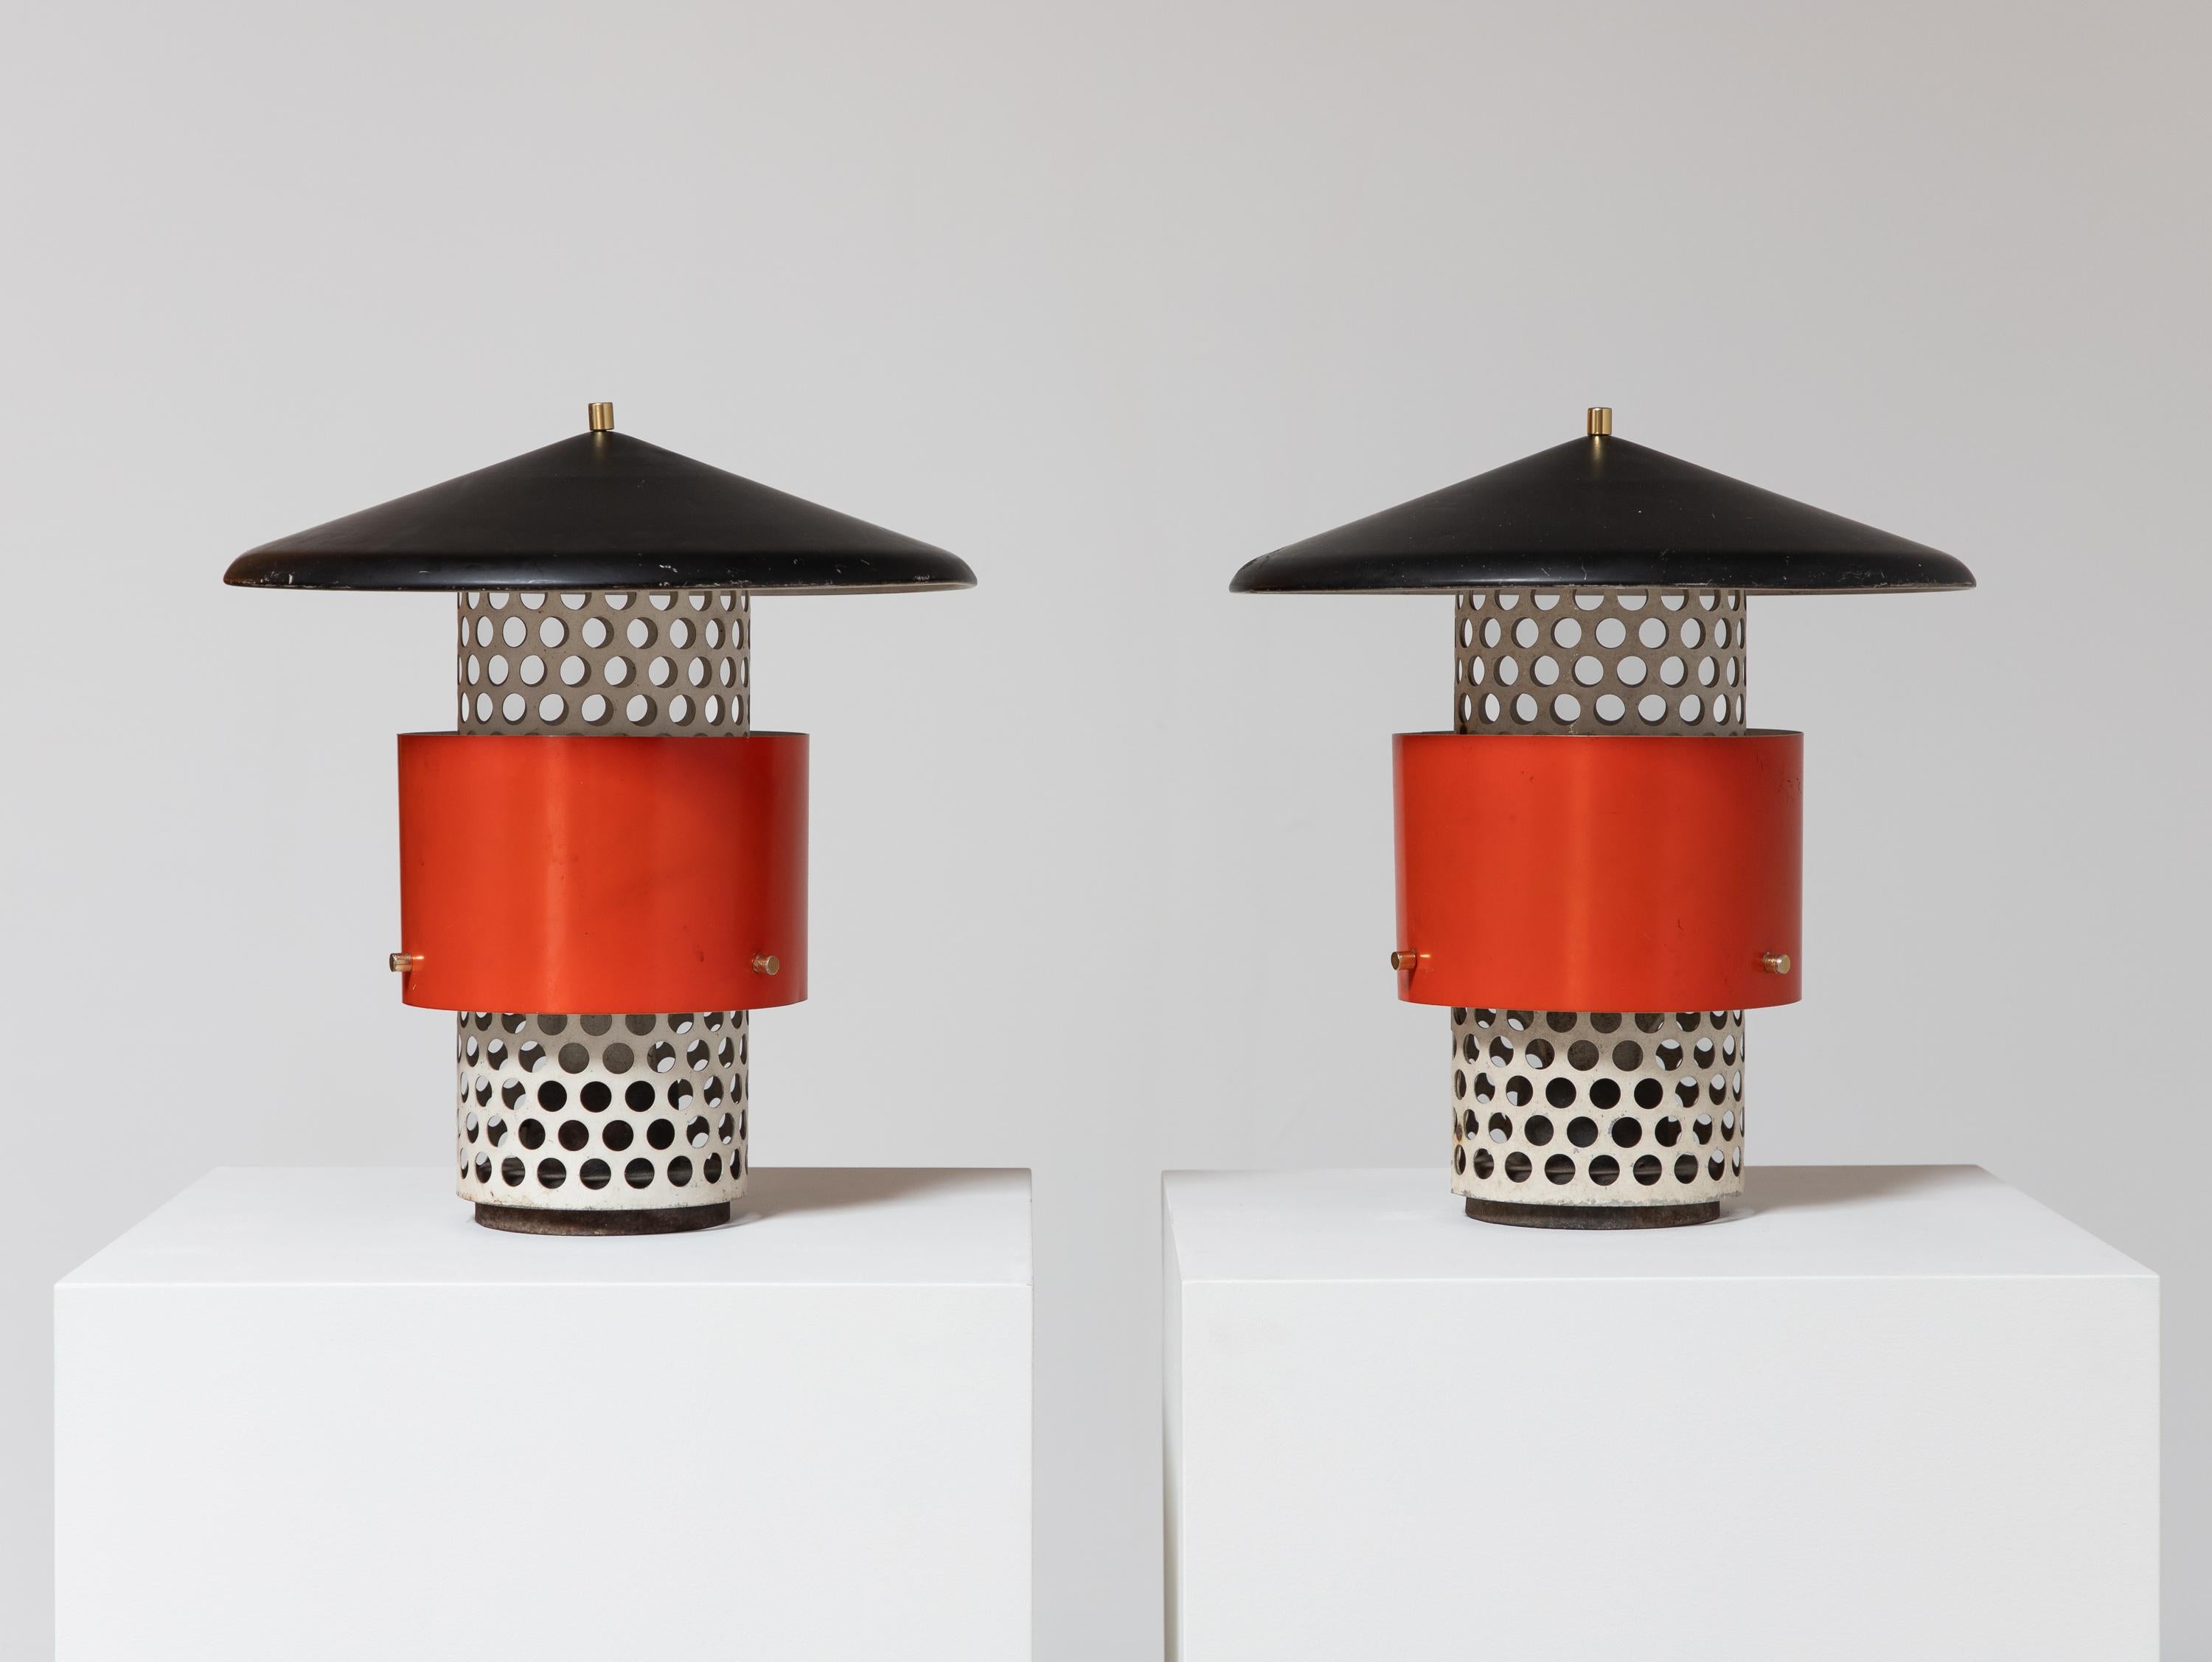 A scarce pair of Lytescape outdoor lamps, often attributed to Gino Sarfratti, manufactured by Lightolier.  These vintage lamps feature perforated metal bases with a bright vermillion shade, elevated with brass hardware and finials. The lamps are